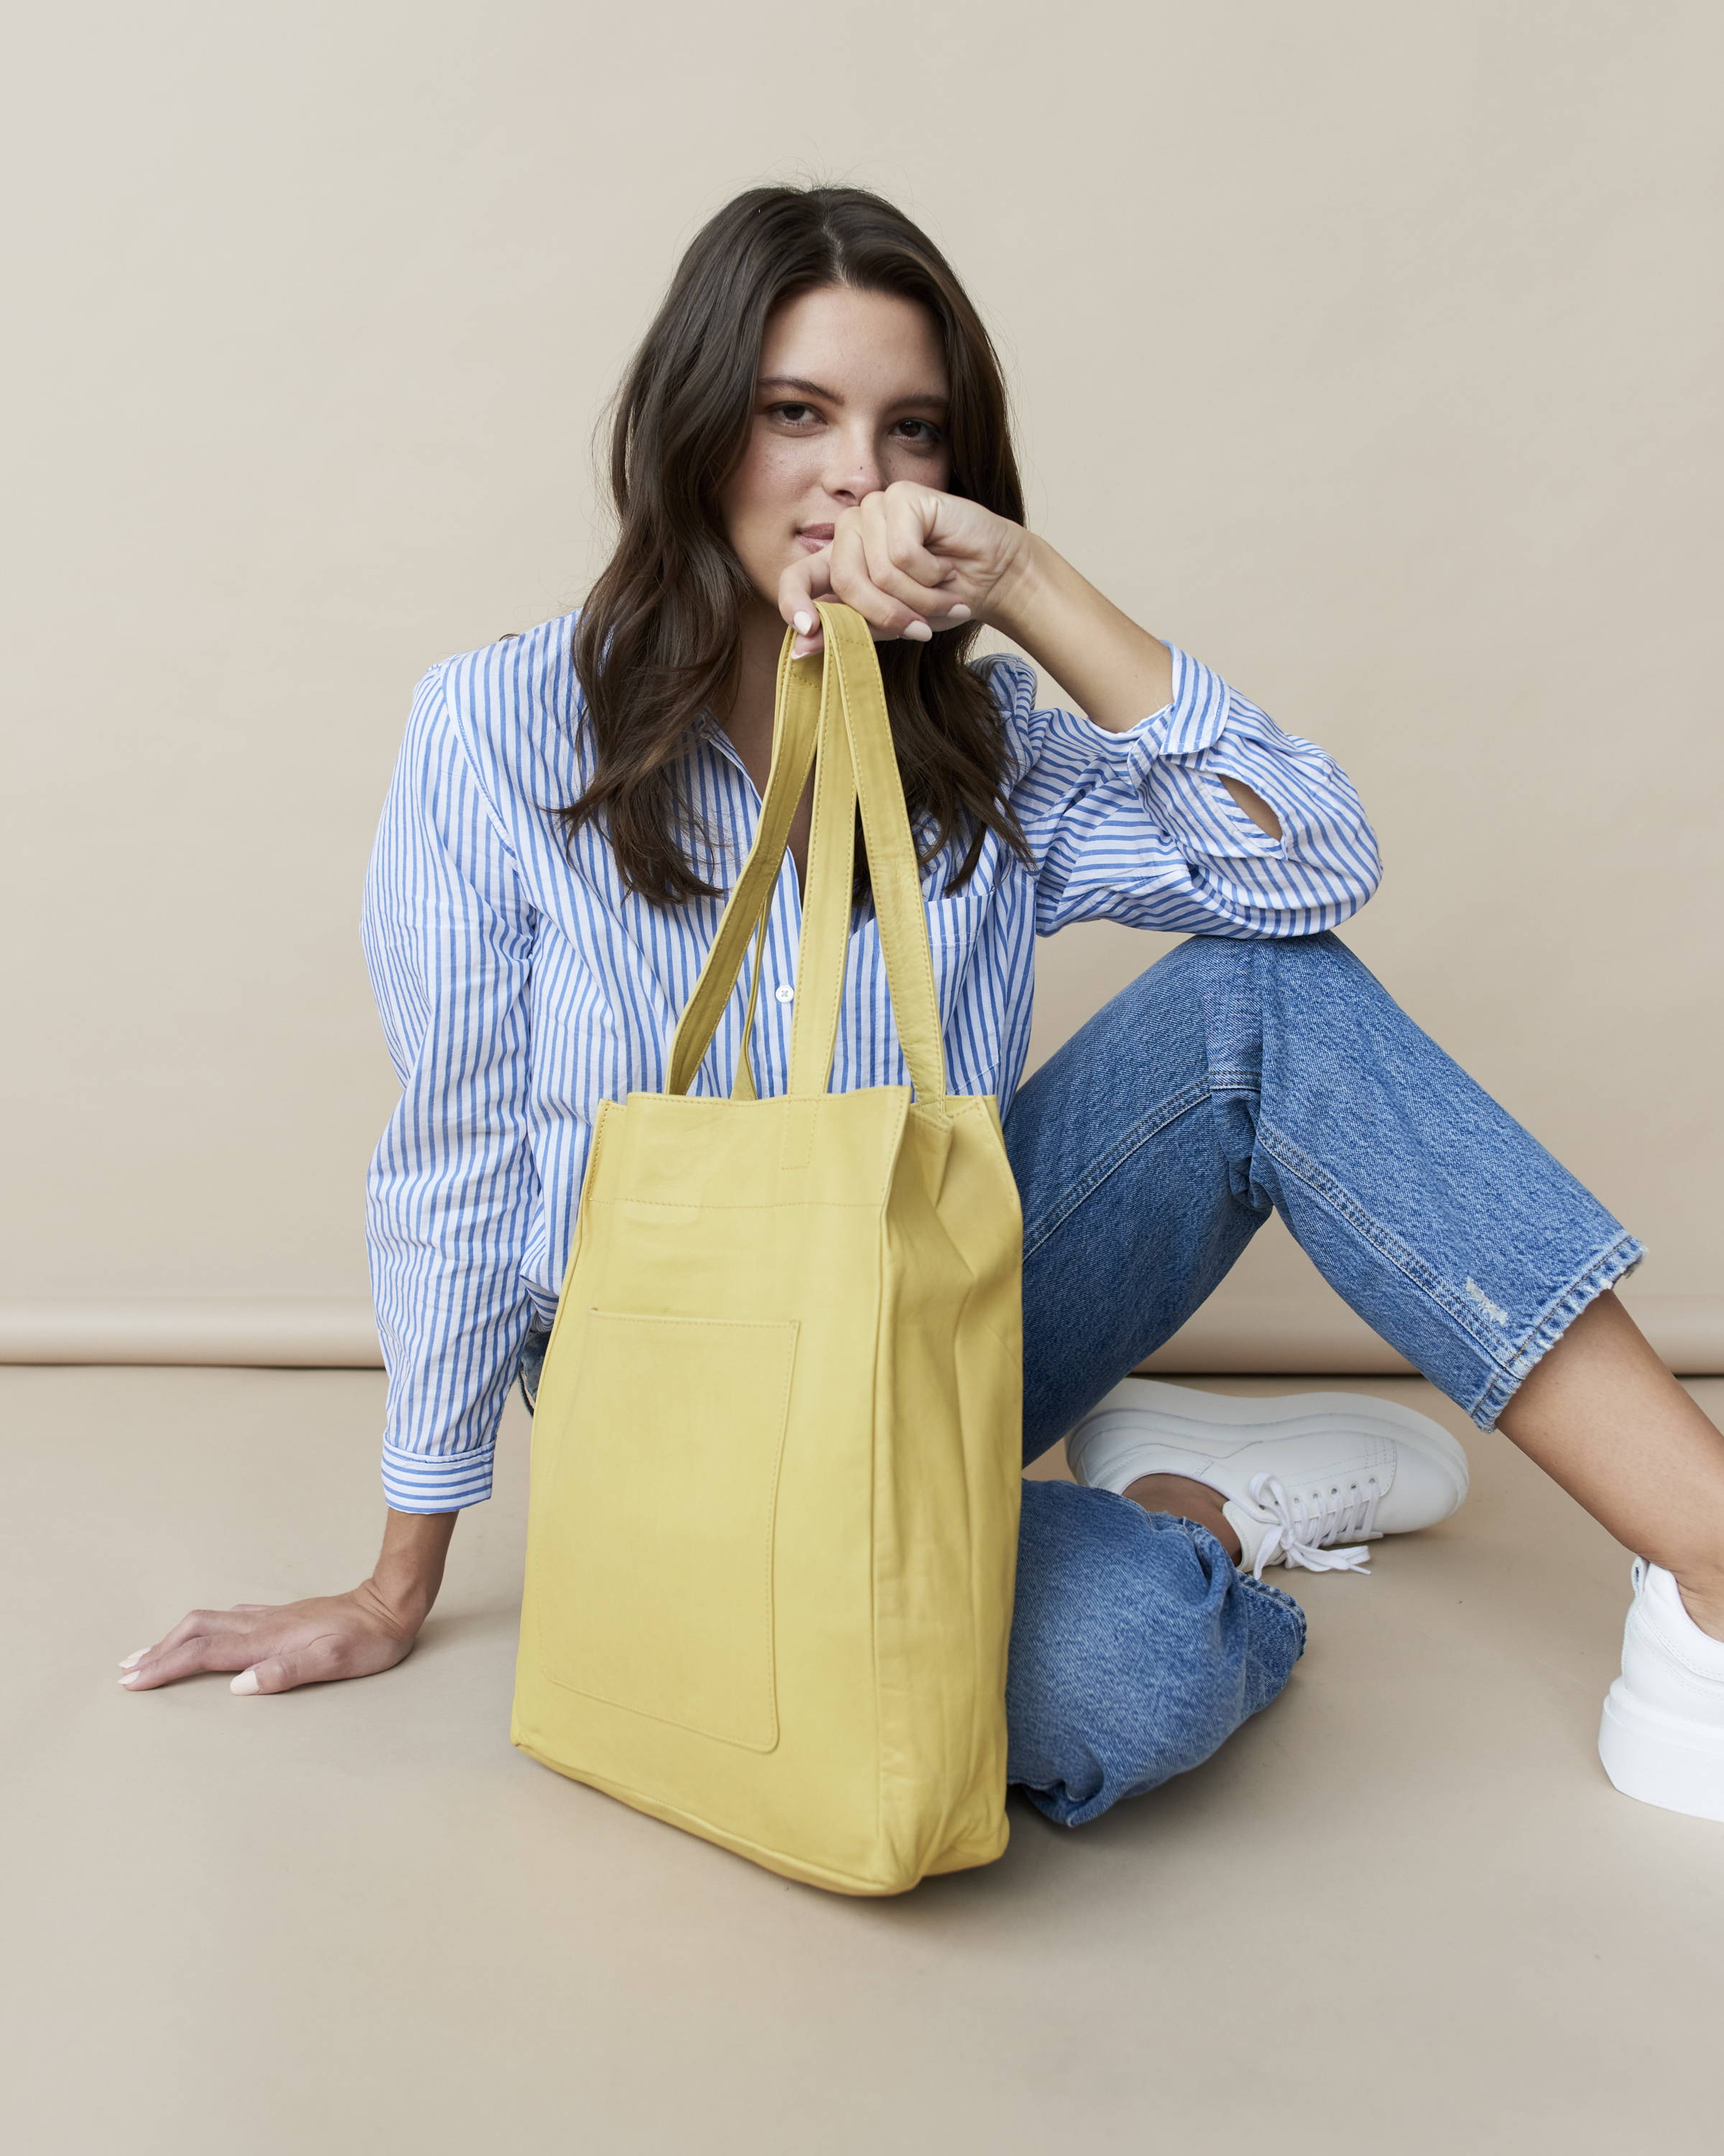 Memorial Day Sales 2021: 7 Summer Bags to Shop Now